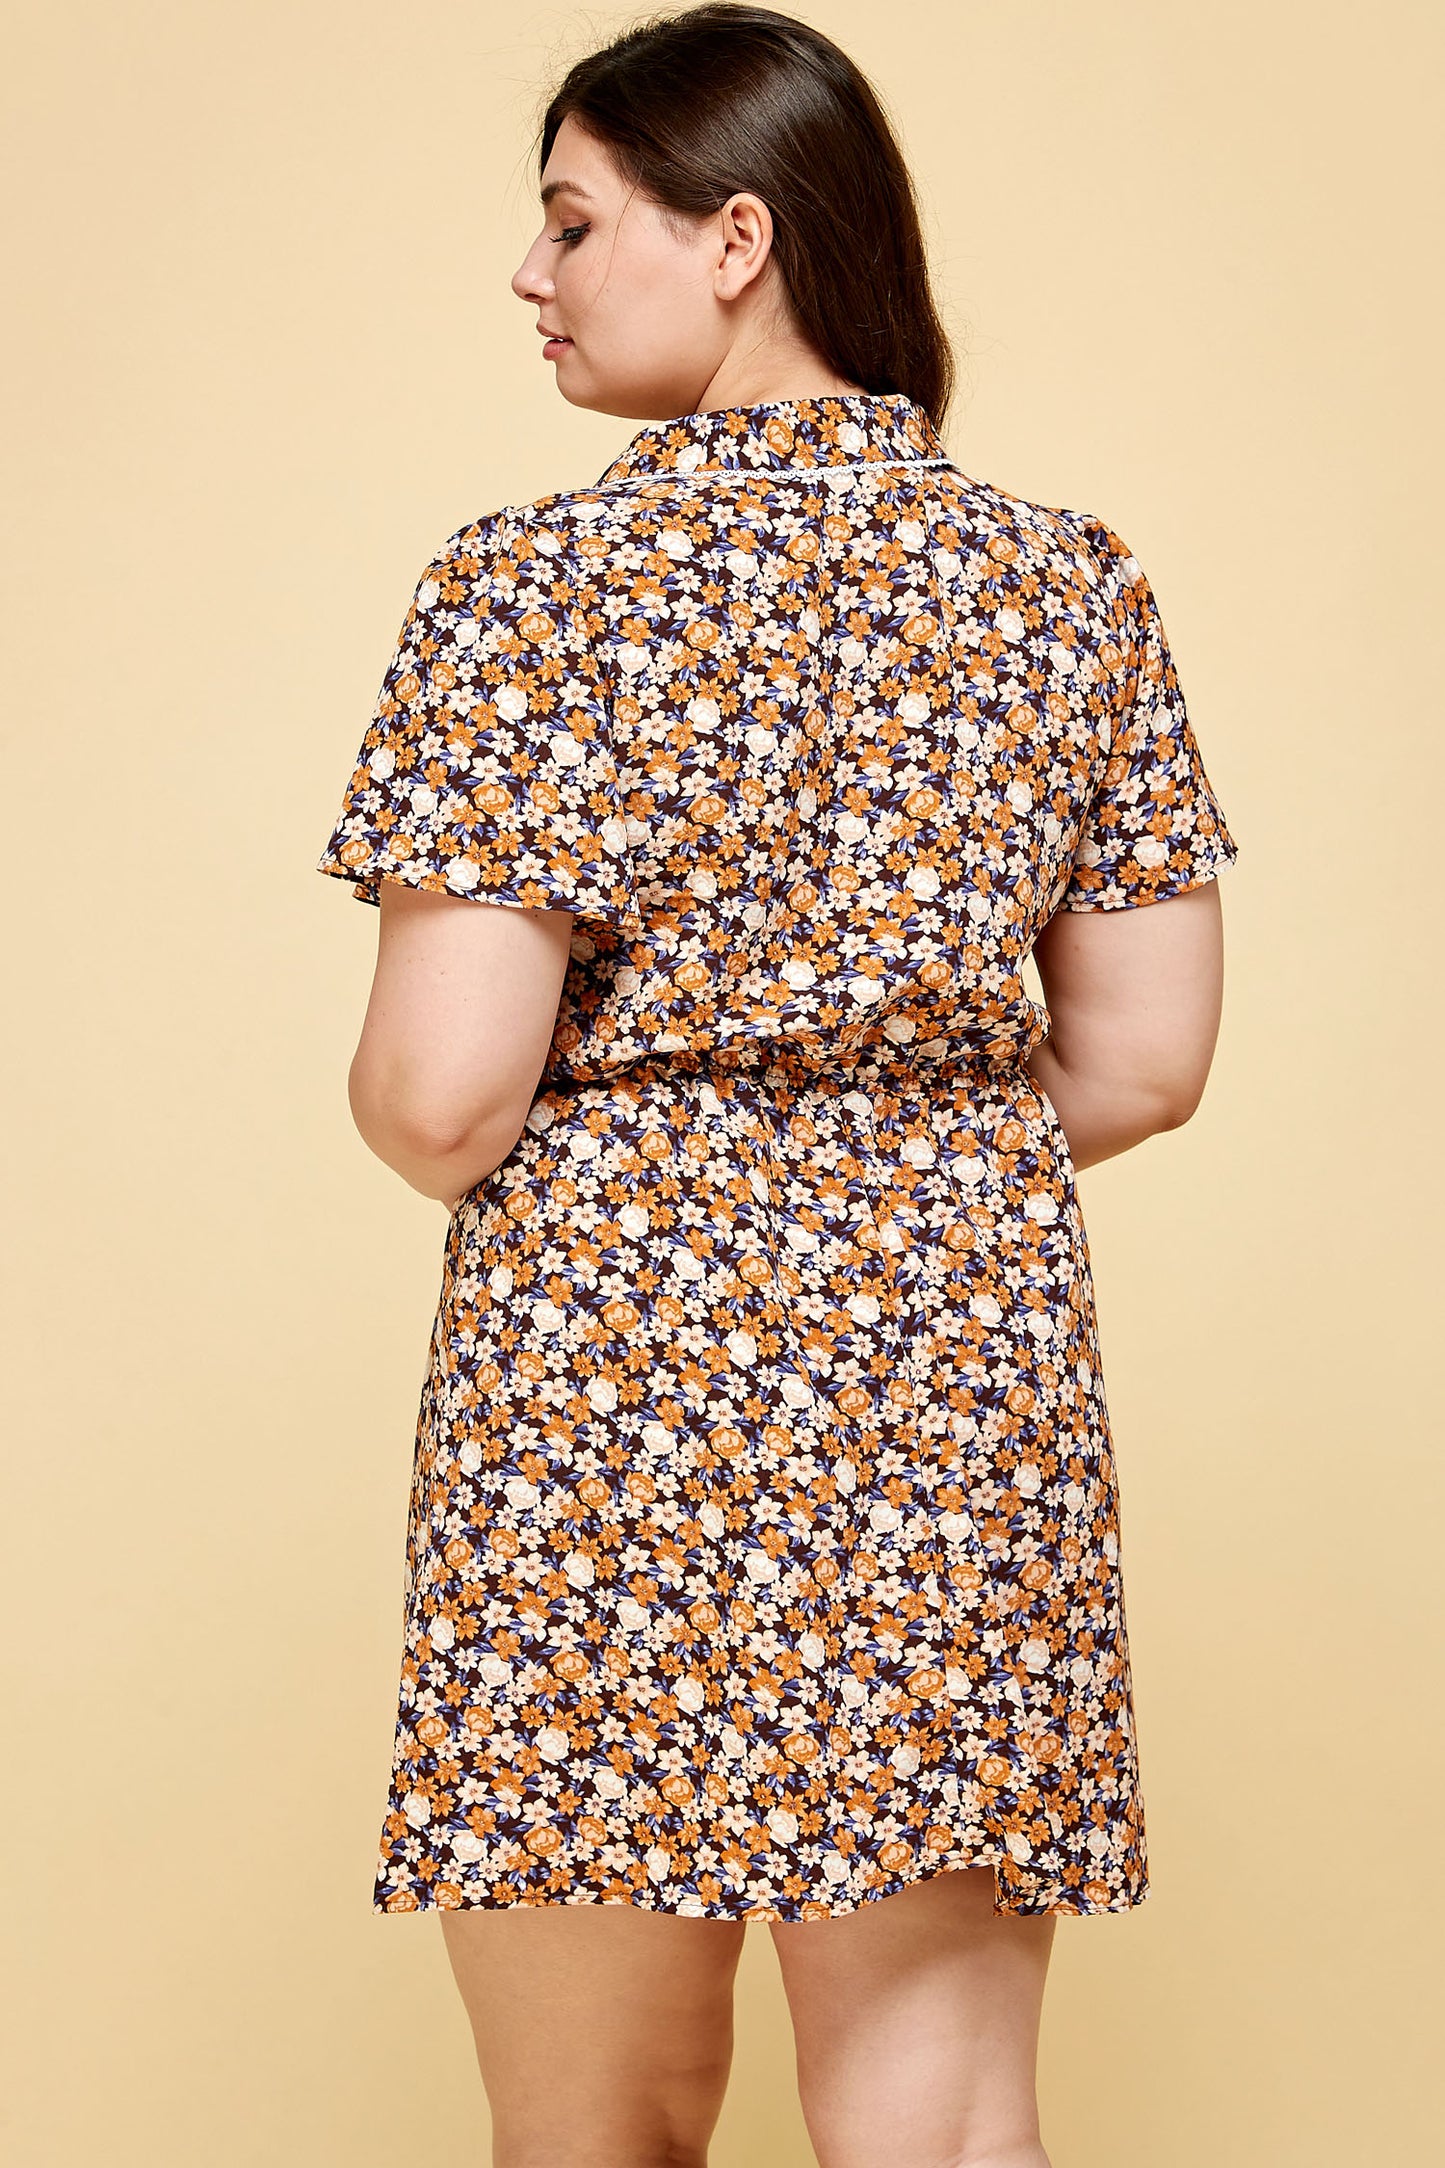 PLUS SIZE COLLARED FLORAL DRESS